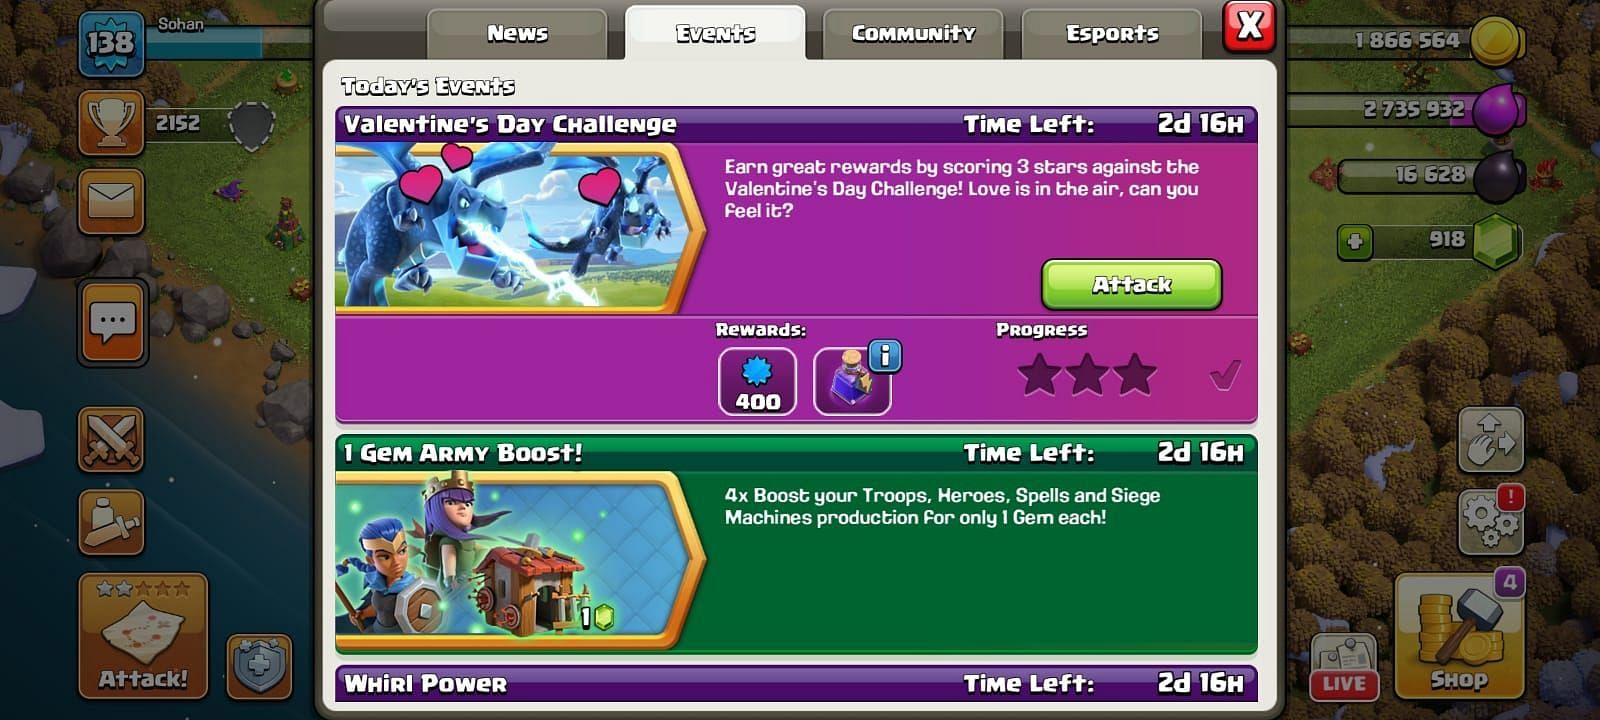 Completing Events (Image via Supercell)